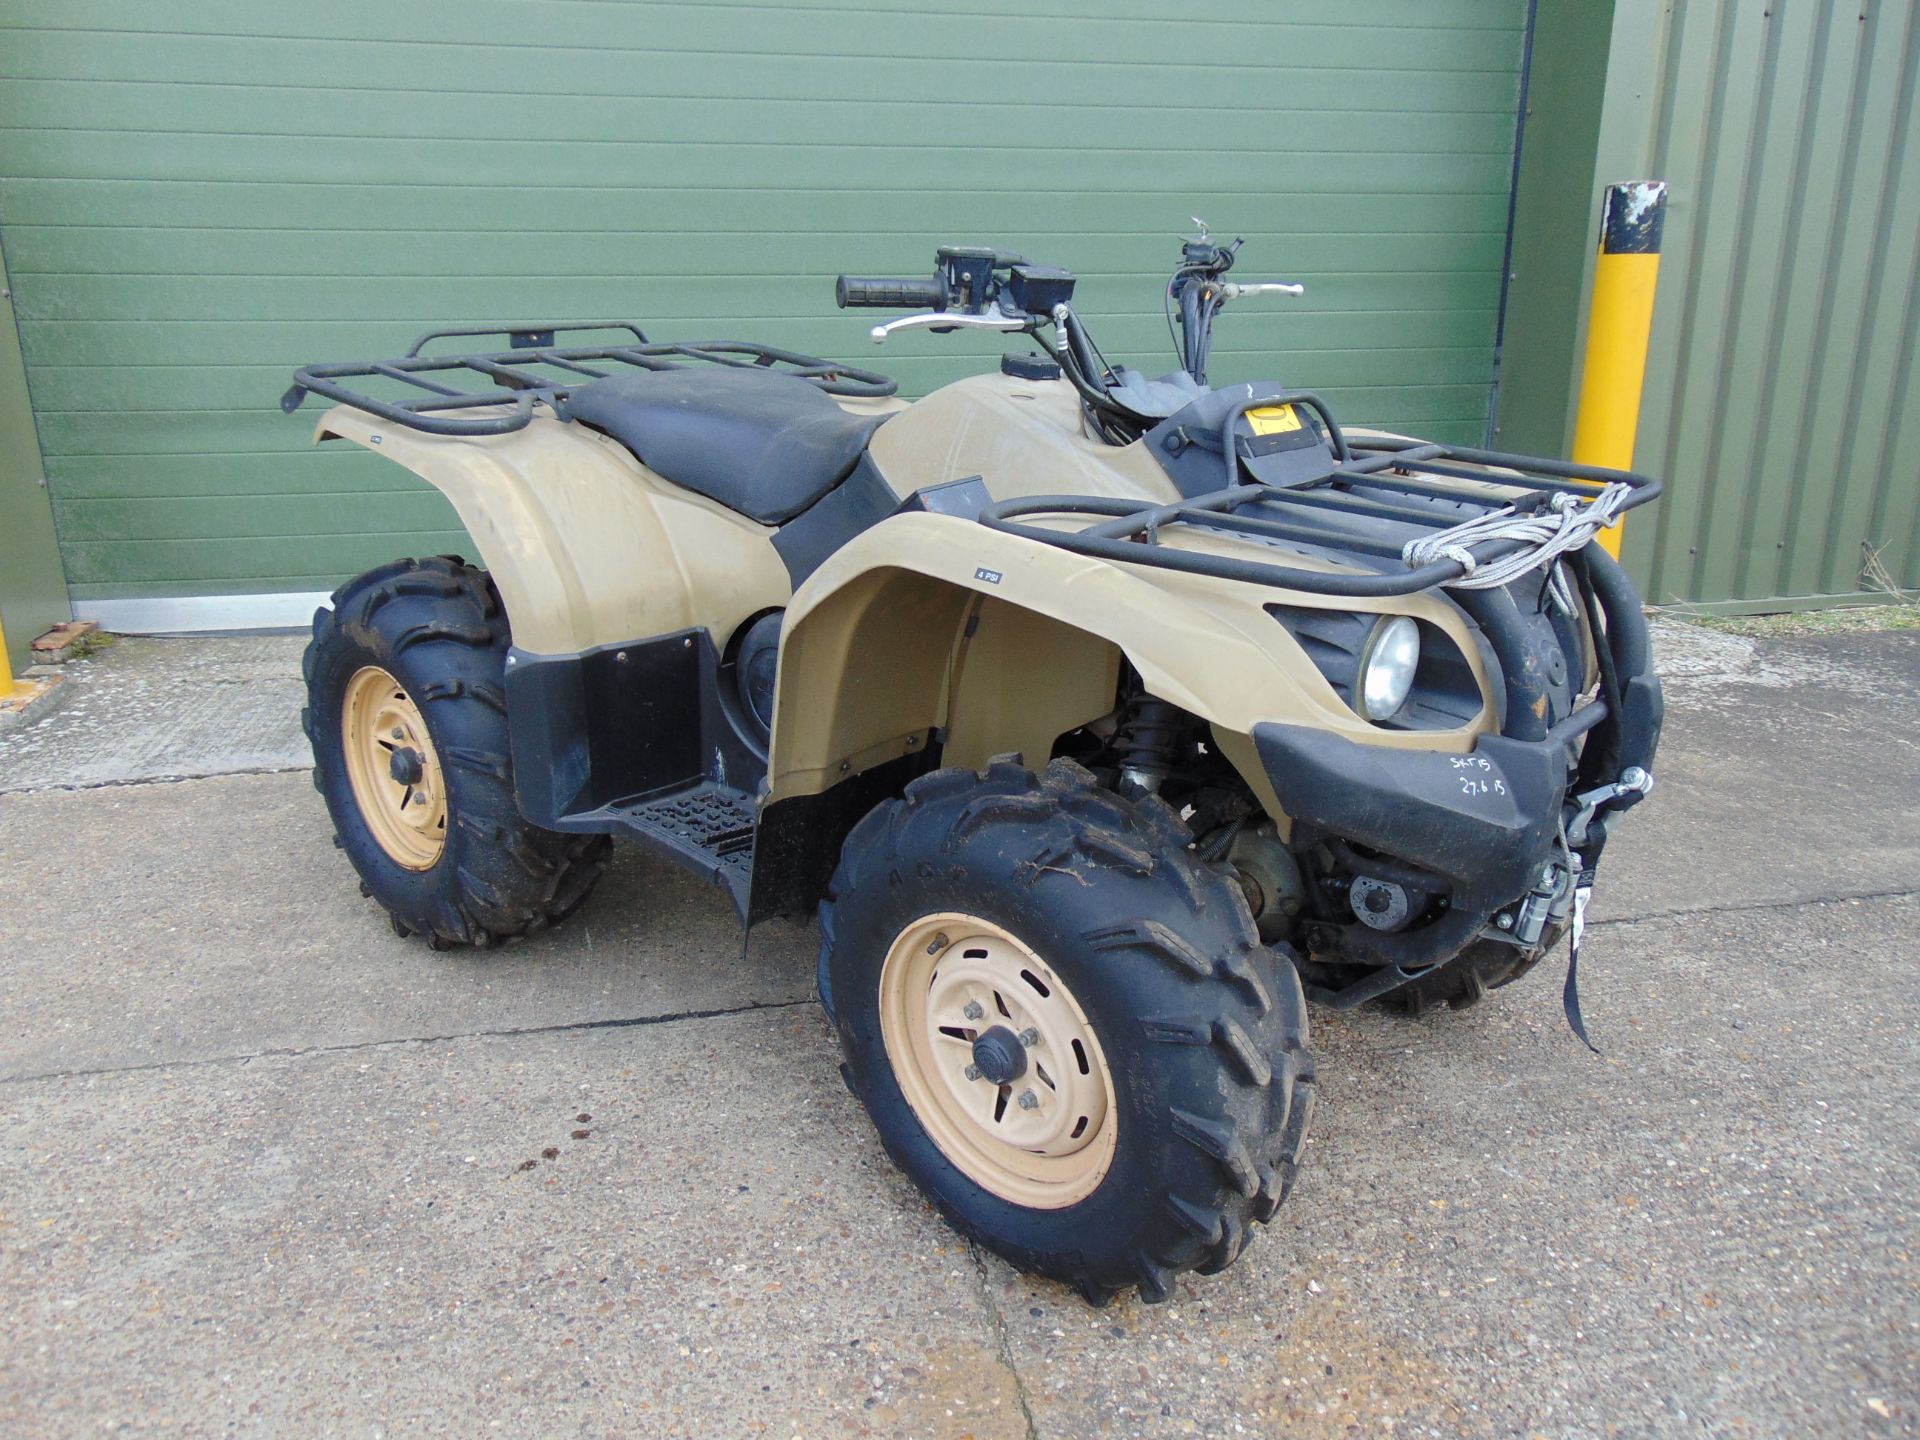 Military Specification Yamaha Grizzly 450 4 x 4 ATV Quad Bike Complete with Winch ONLY 591 HOURS!